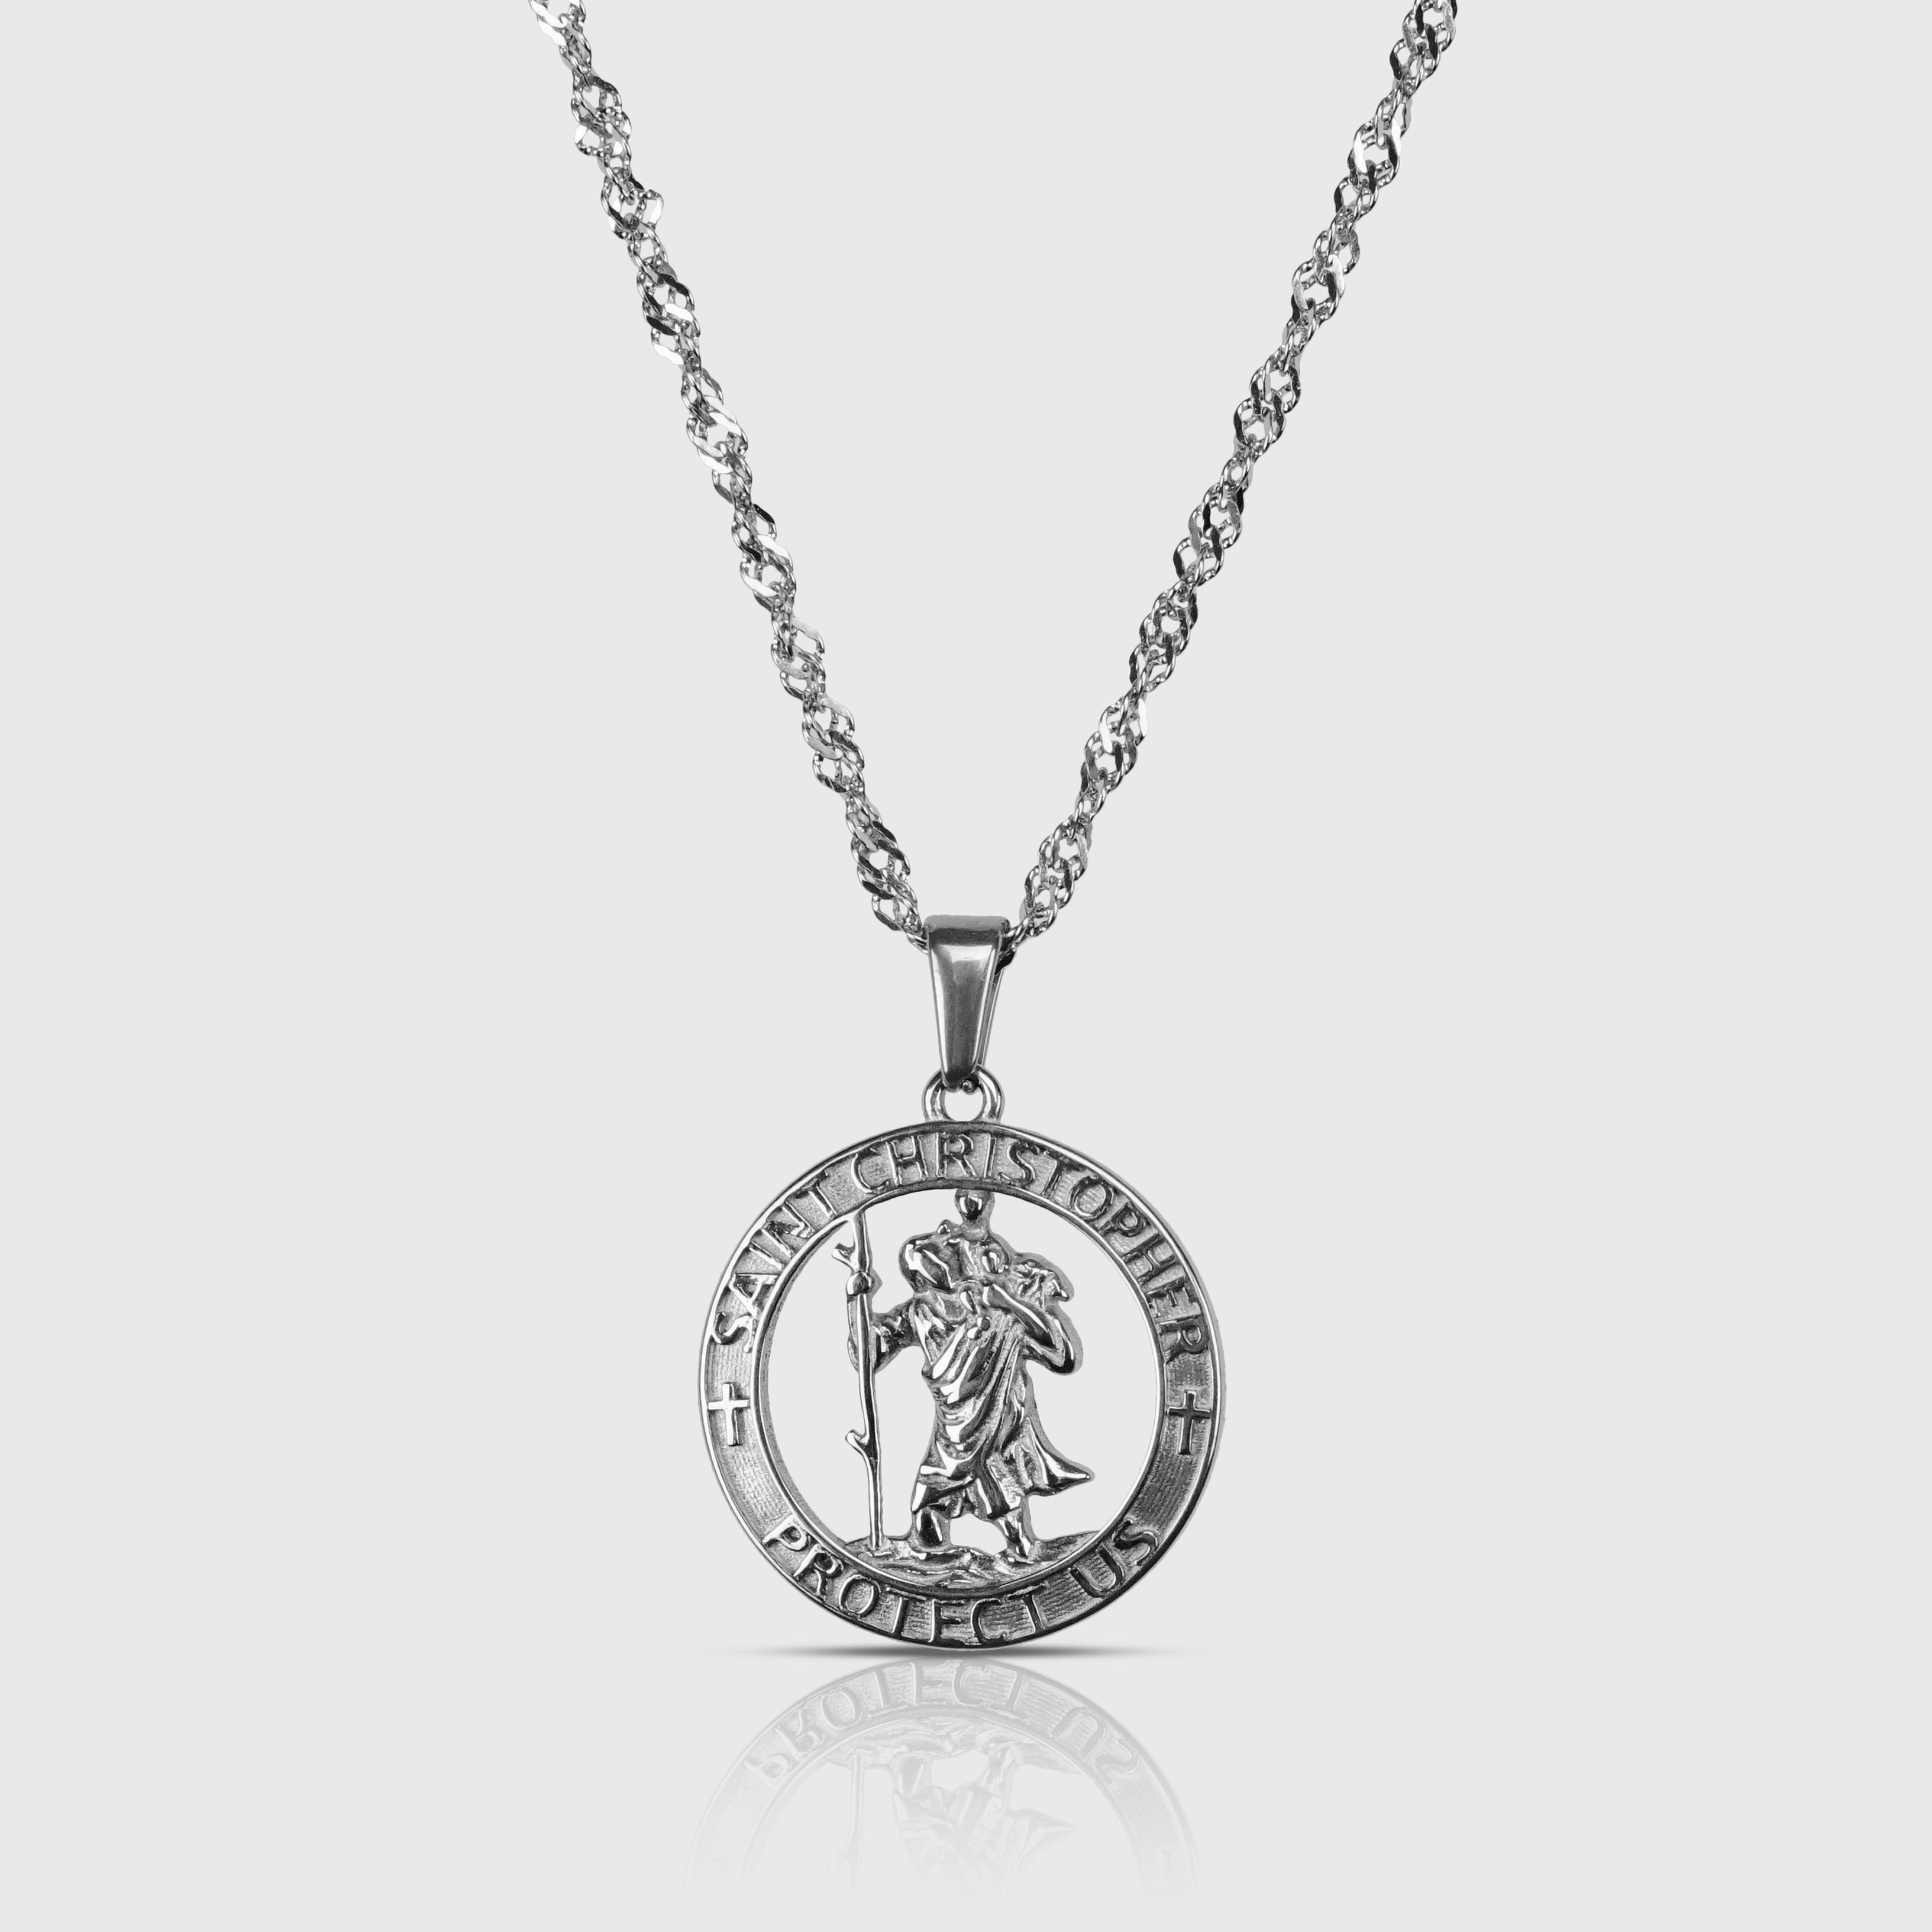 Saint Christopher Necklace Mens Medal Silver Cast Medallion Jerusalem Cross  Stainless Steel Chain Patron Saint Police Officers Soldiers